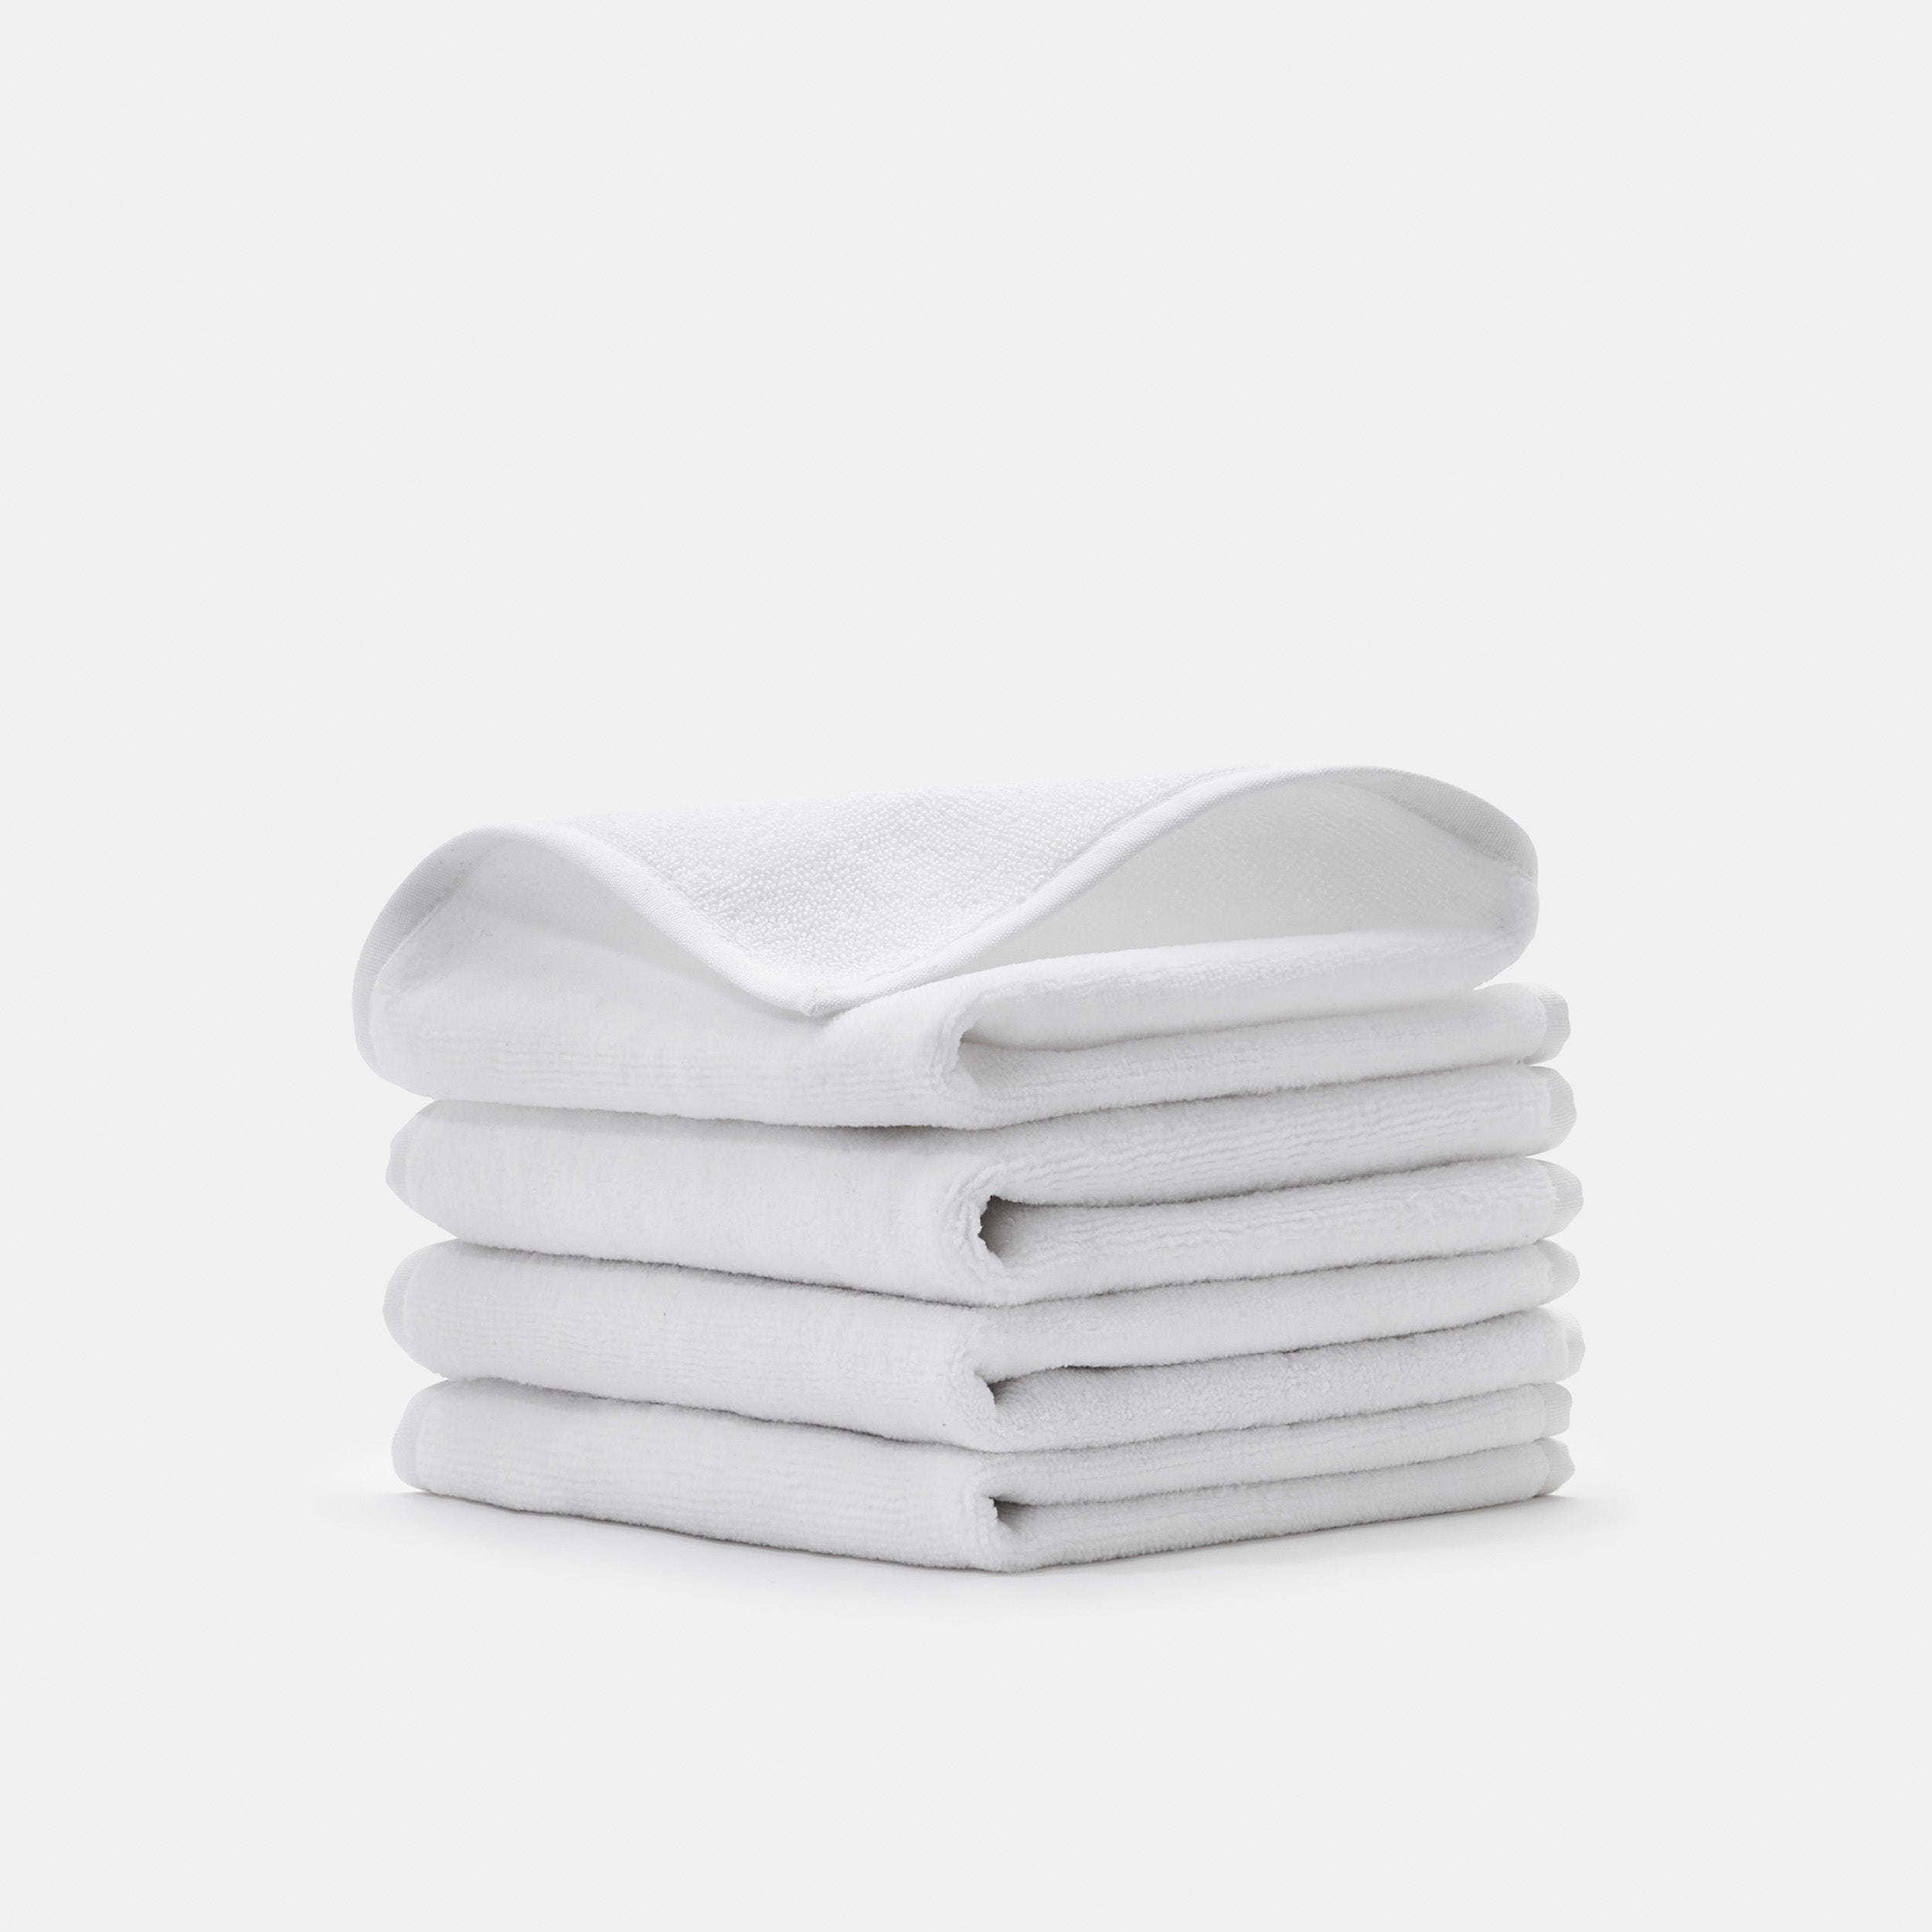 Boutique Hotel Terry / Washcloths 12" x 12" / PROSSIONI® White